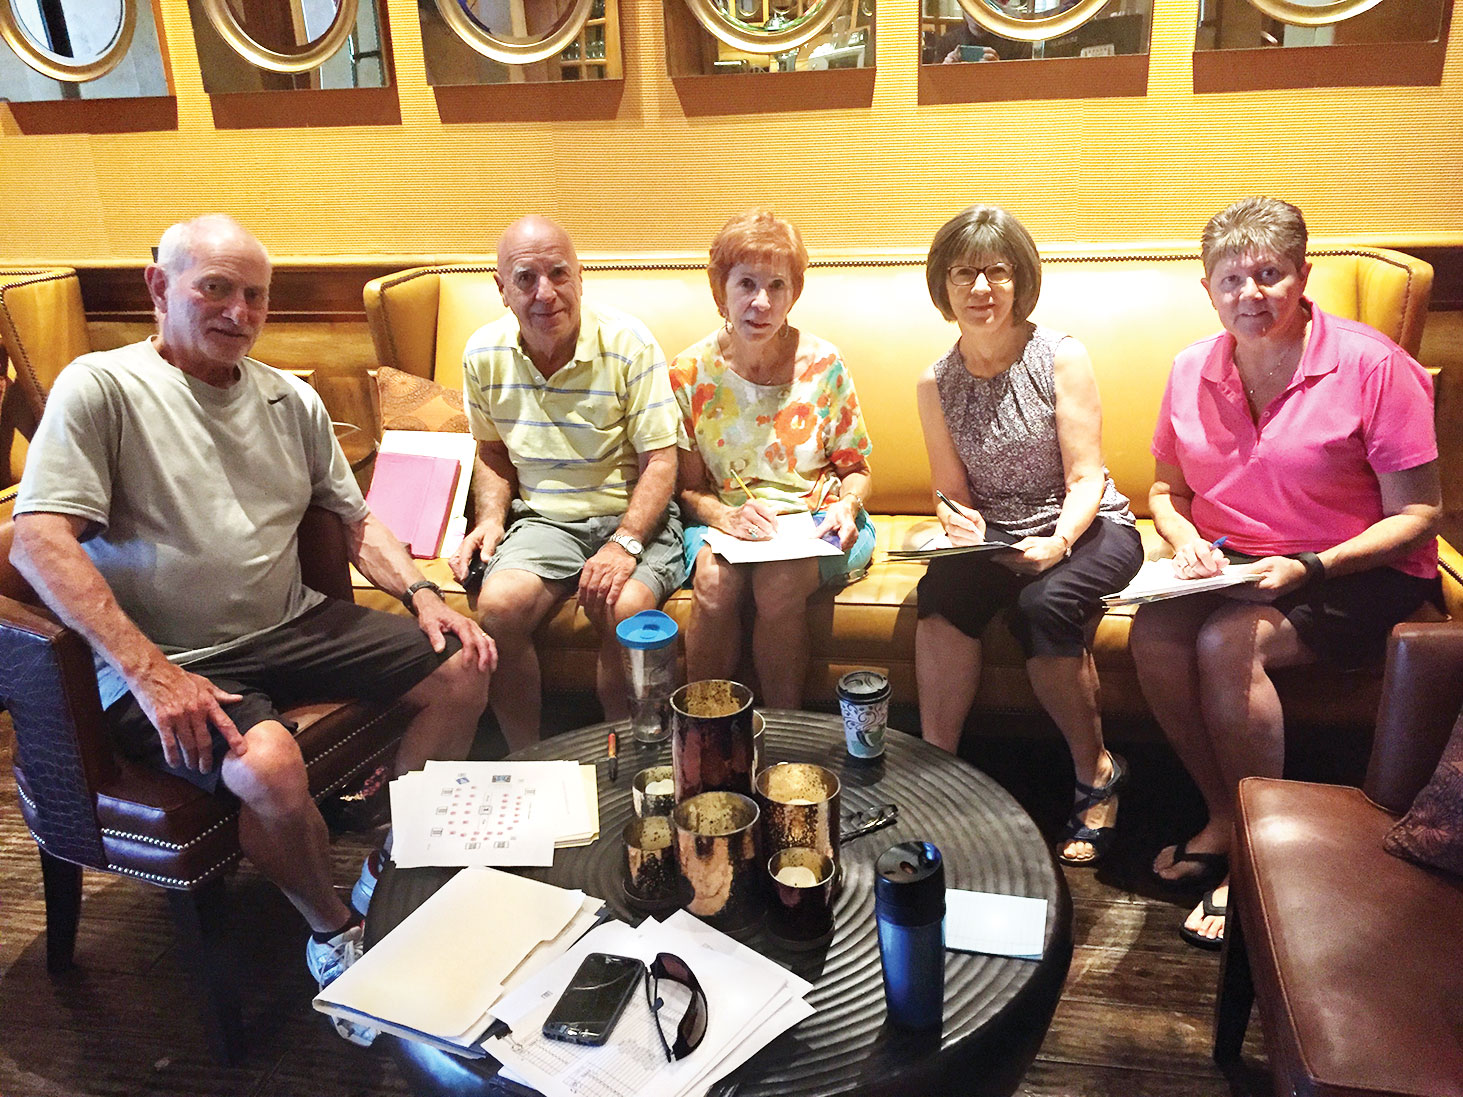 Members of the committee, left to right: Ken Minichiello, president, Everett Saverino, treasurer, Rosemary Holmes, chairperson, JoAnn Fioretti and Jackie Voccola